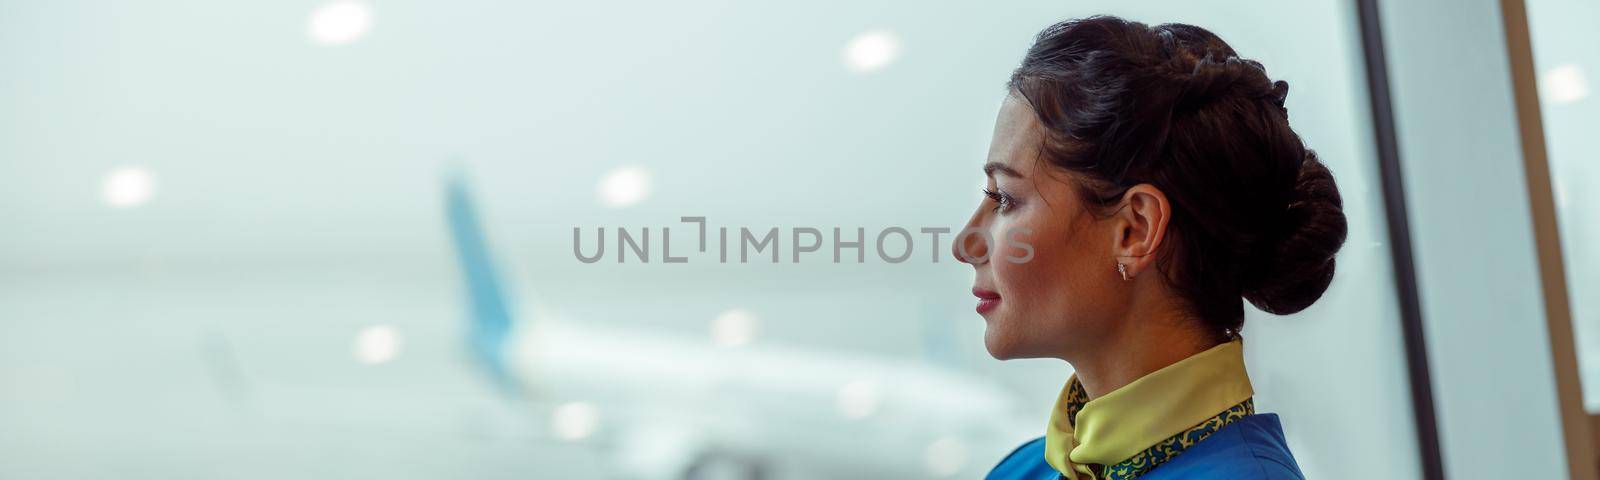 Female flight attendant looking out the window in airport terminal by Yaroslav_astakhov